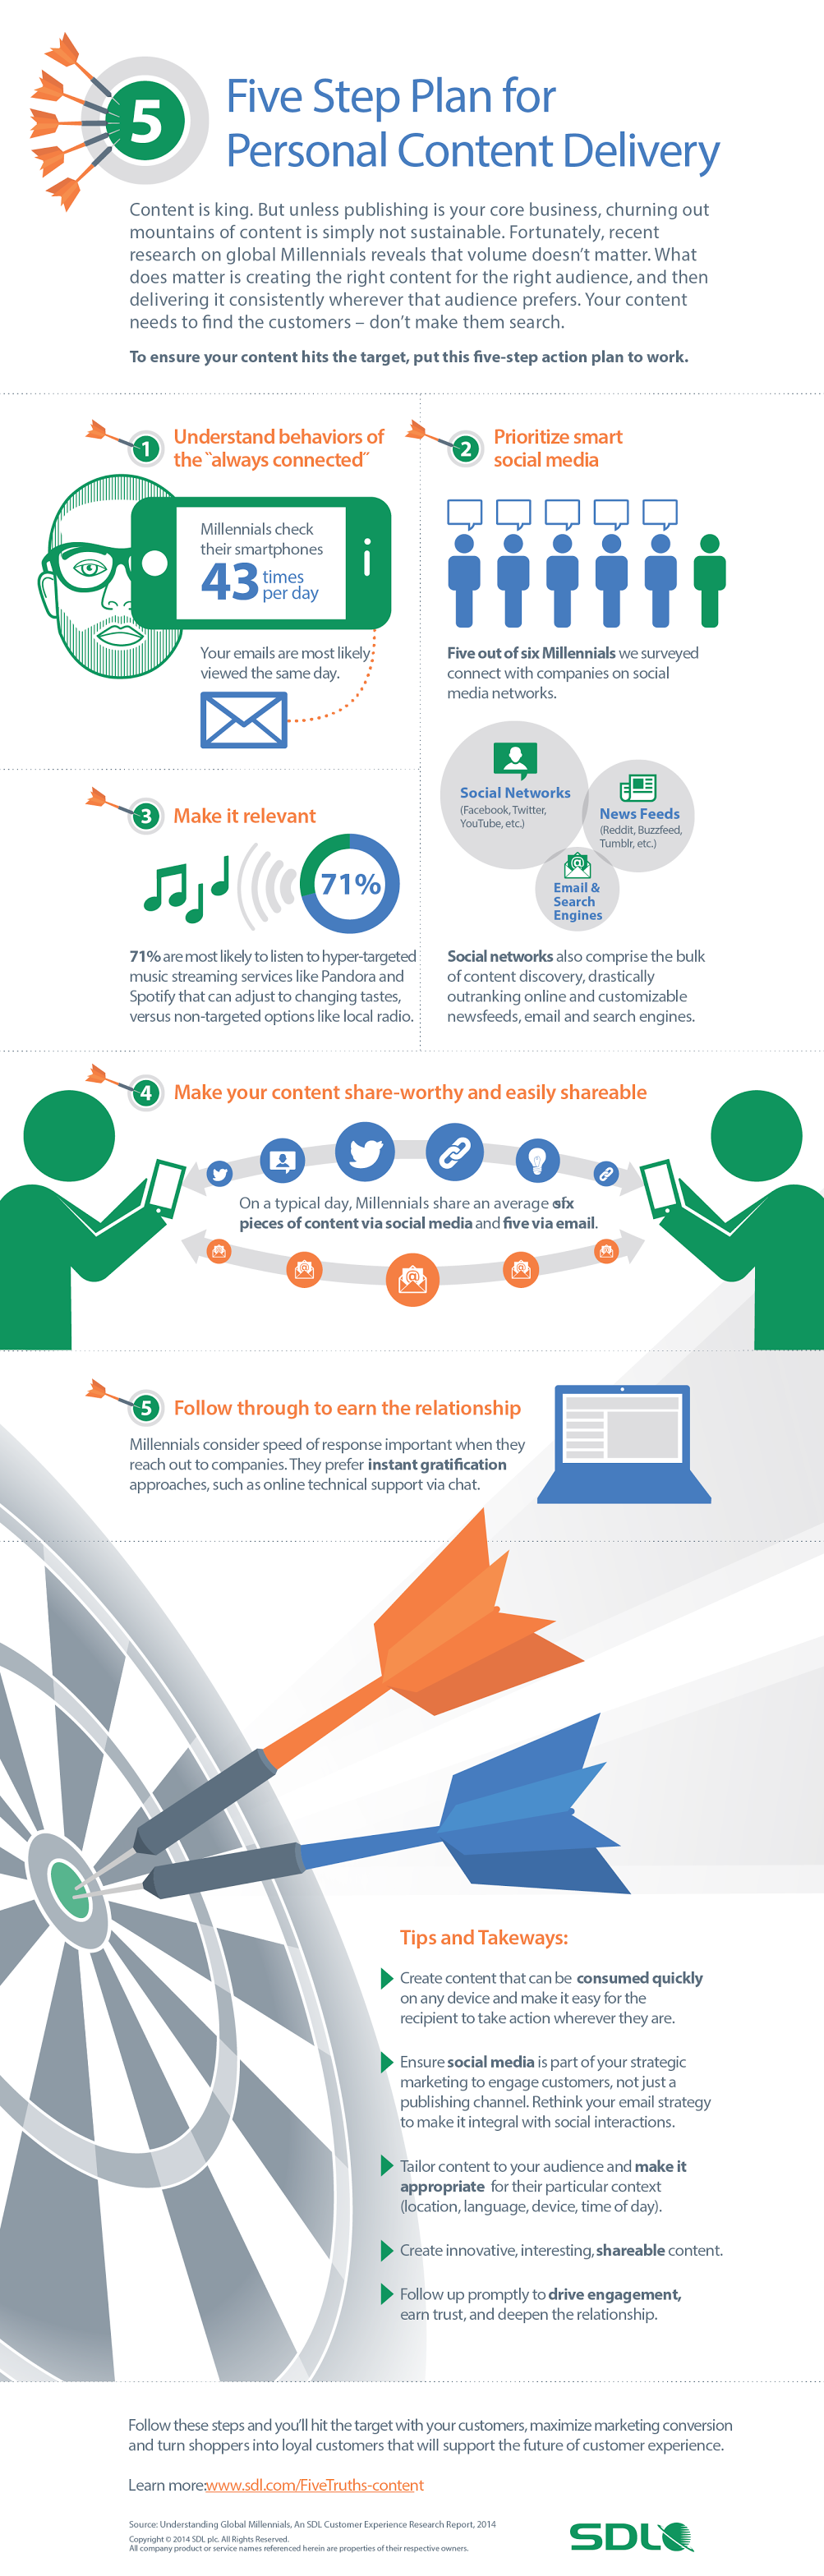 Five Step Plan for Personal Content Delivery - #infographic #contentmarketing #contentstrategy